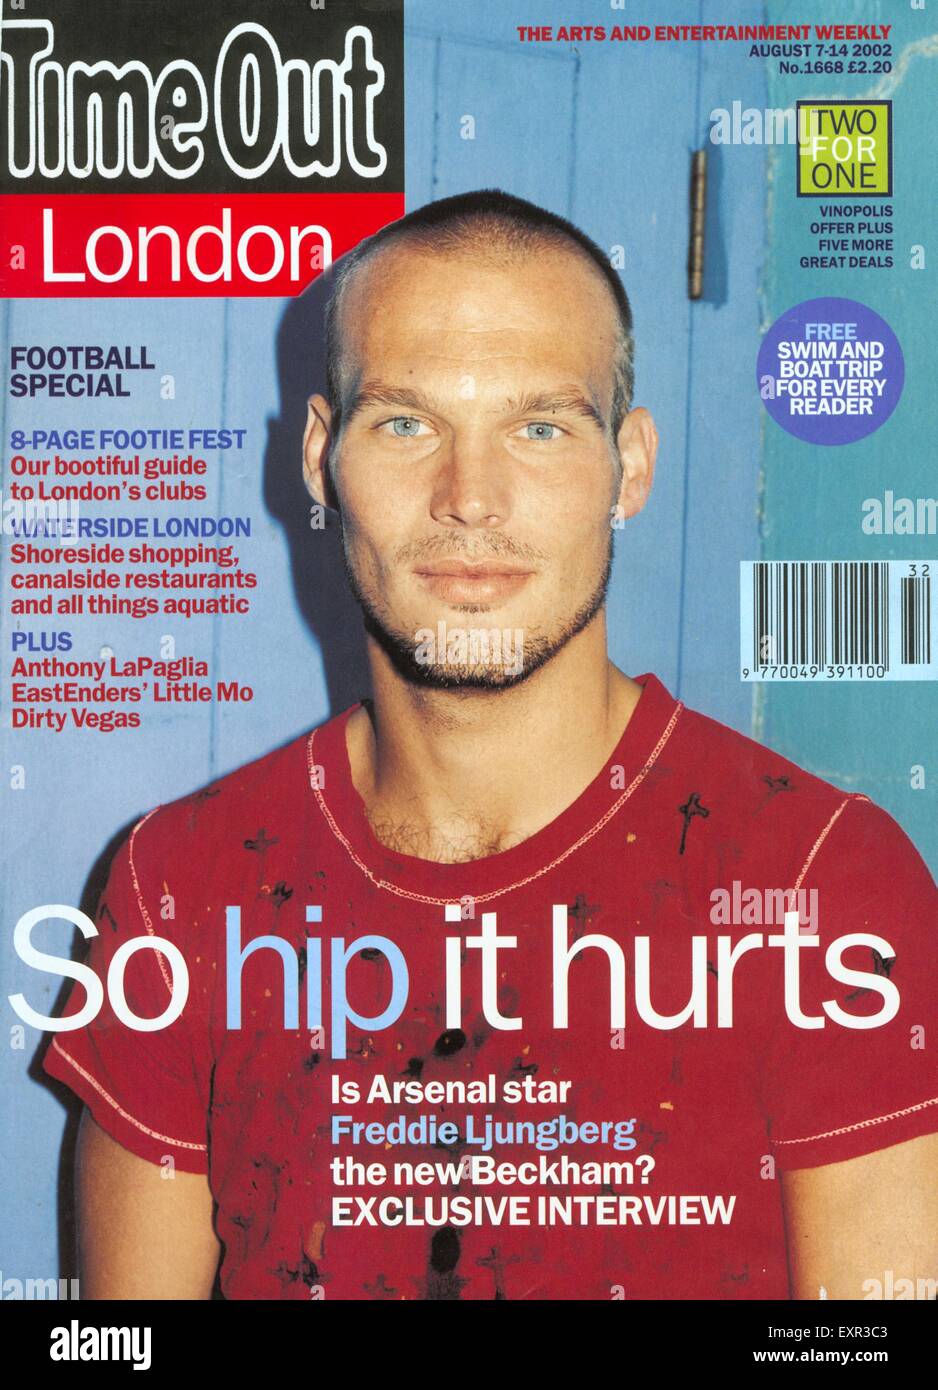 2000s UK Time Out Magazine Cover Stock Photo